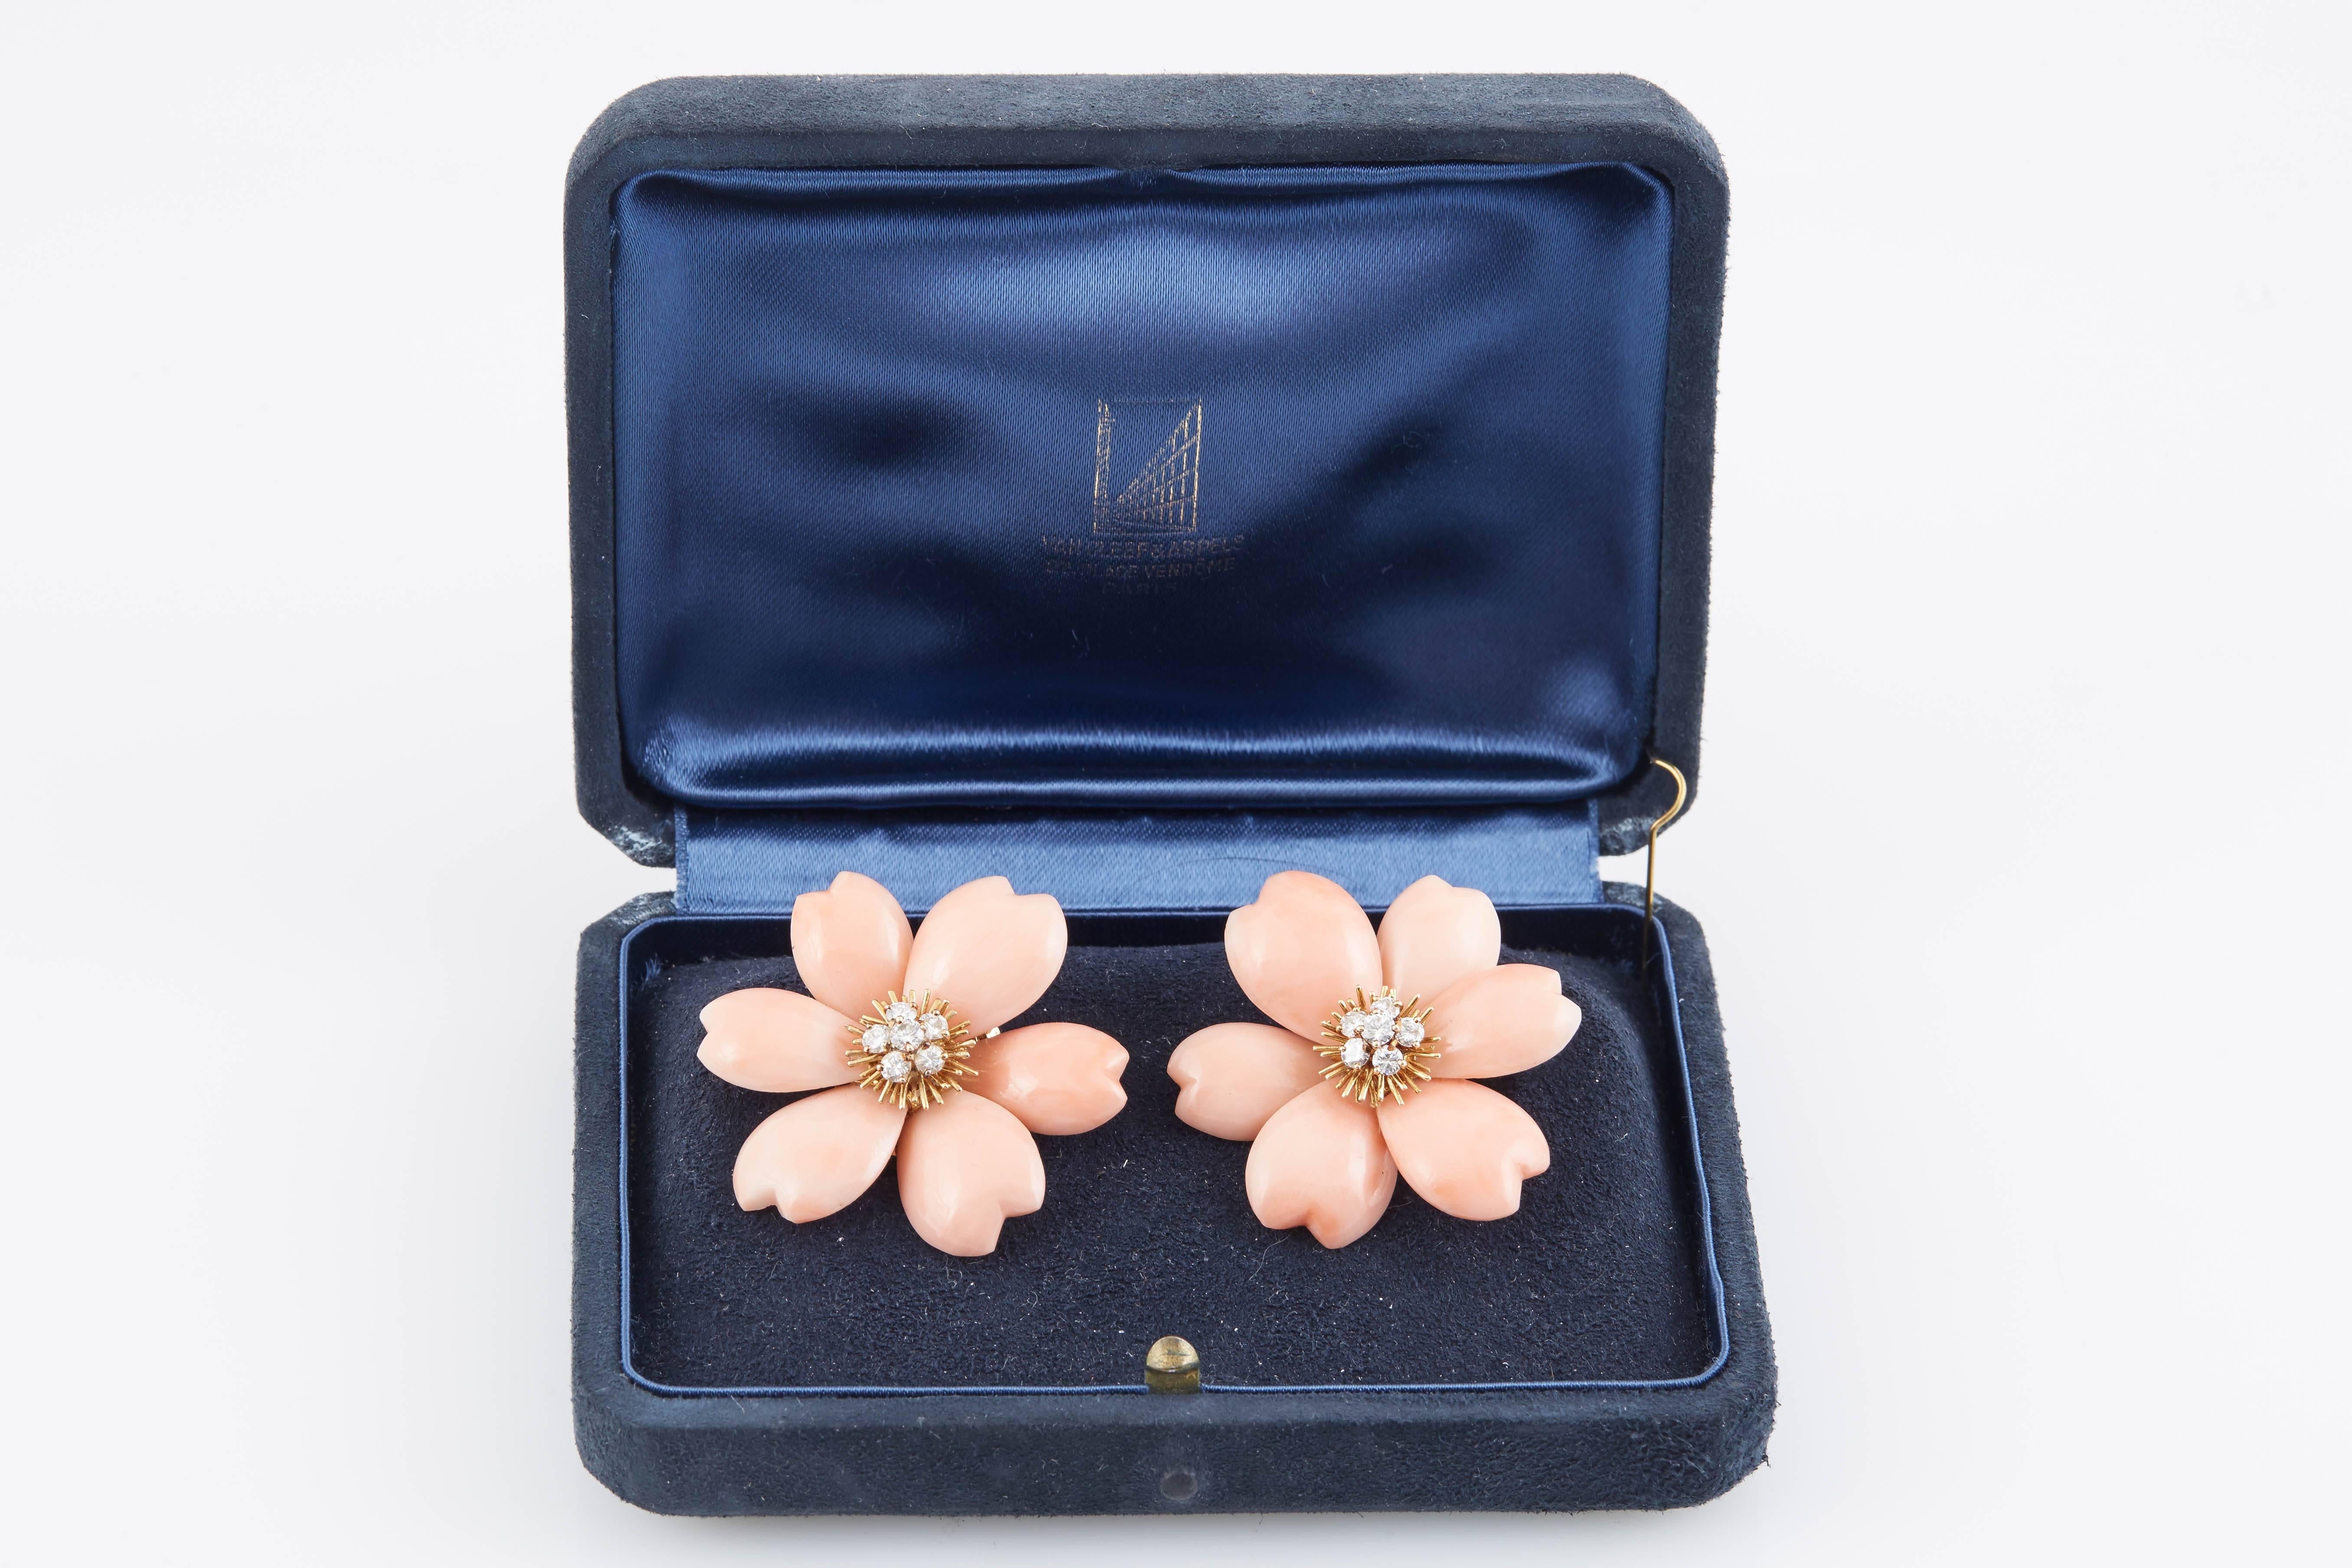 Beautiful coral  Earrings by Van Cleef & Arpels. Each of floral design composed of coral petals around clusters of brilliant-cut diamonds. Total diamond weight 1.00 carat.The earrings have post fittings French assay and maker's marks, Van Cleef &